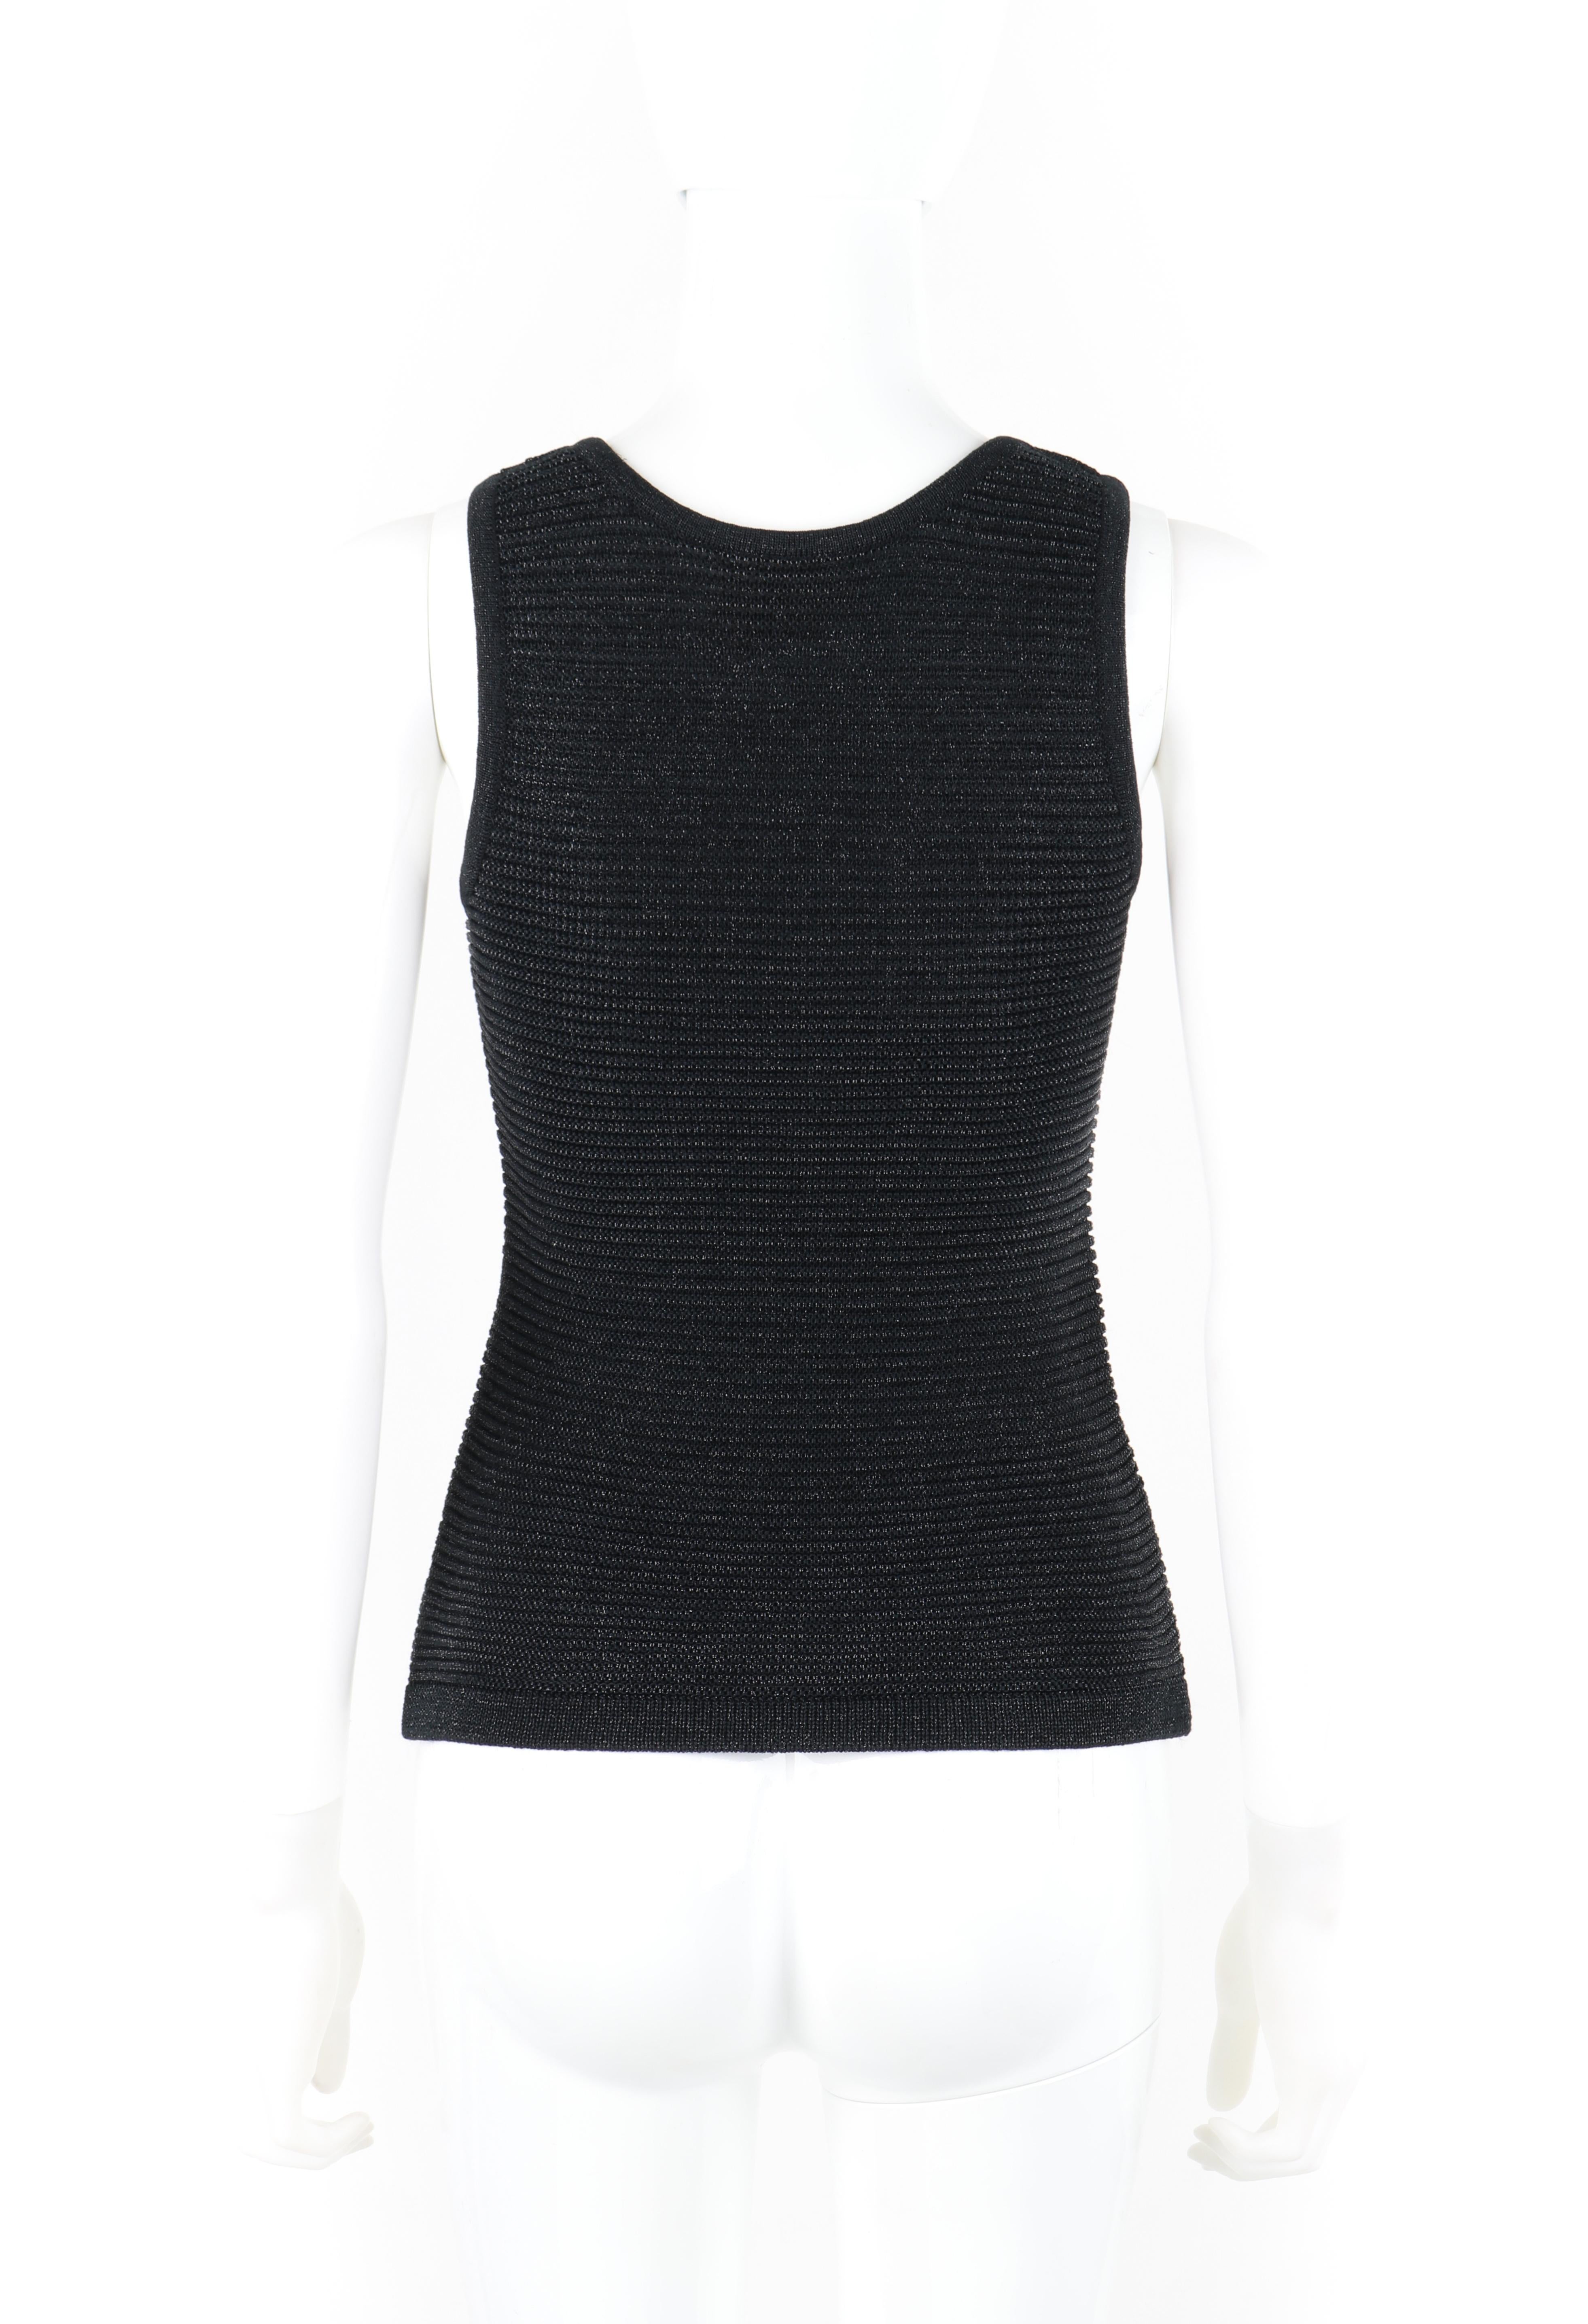 Women's COURREGES c.1960s Black Sparkle Sheen Knit Zip-Up Sleeveless Sweater Top For Sale